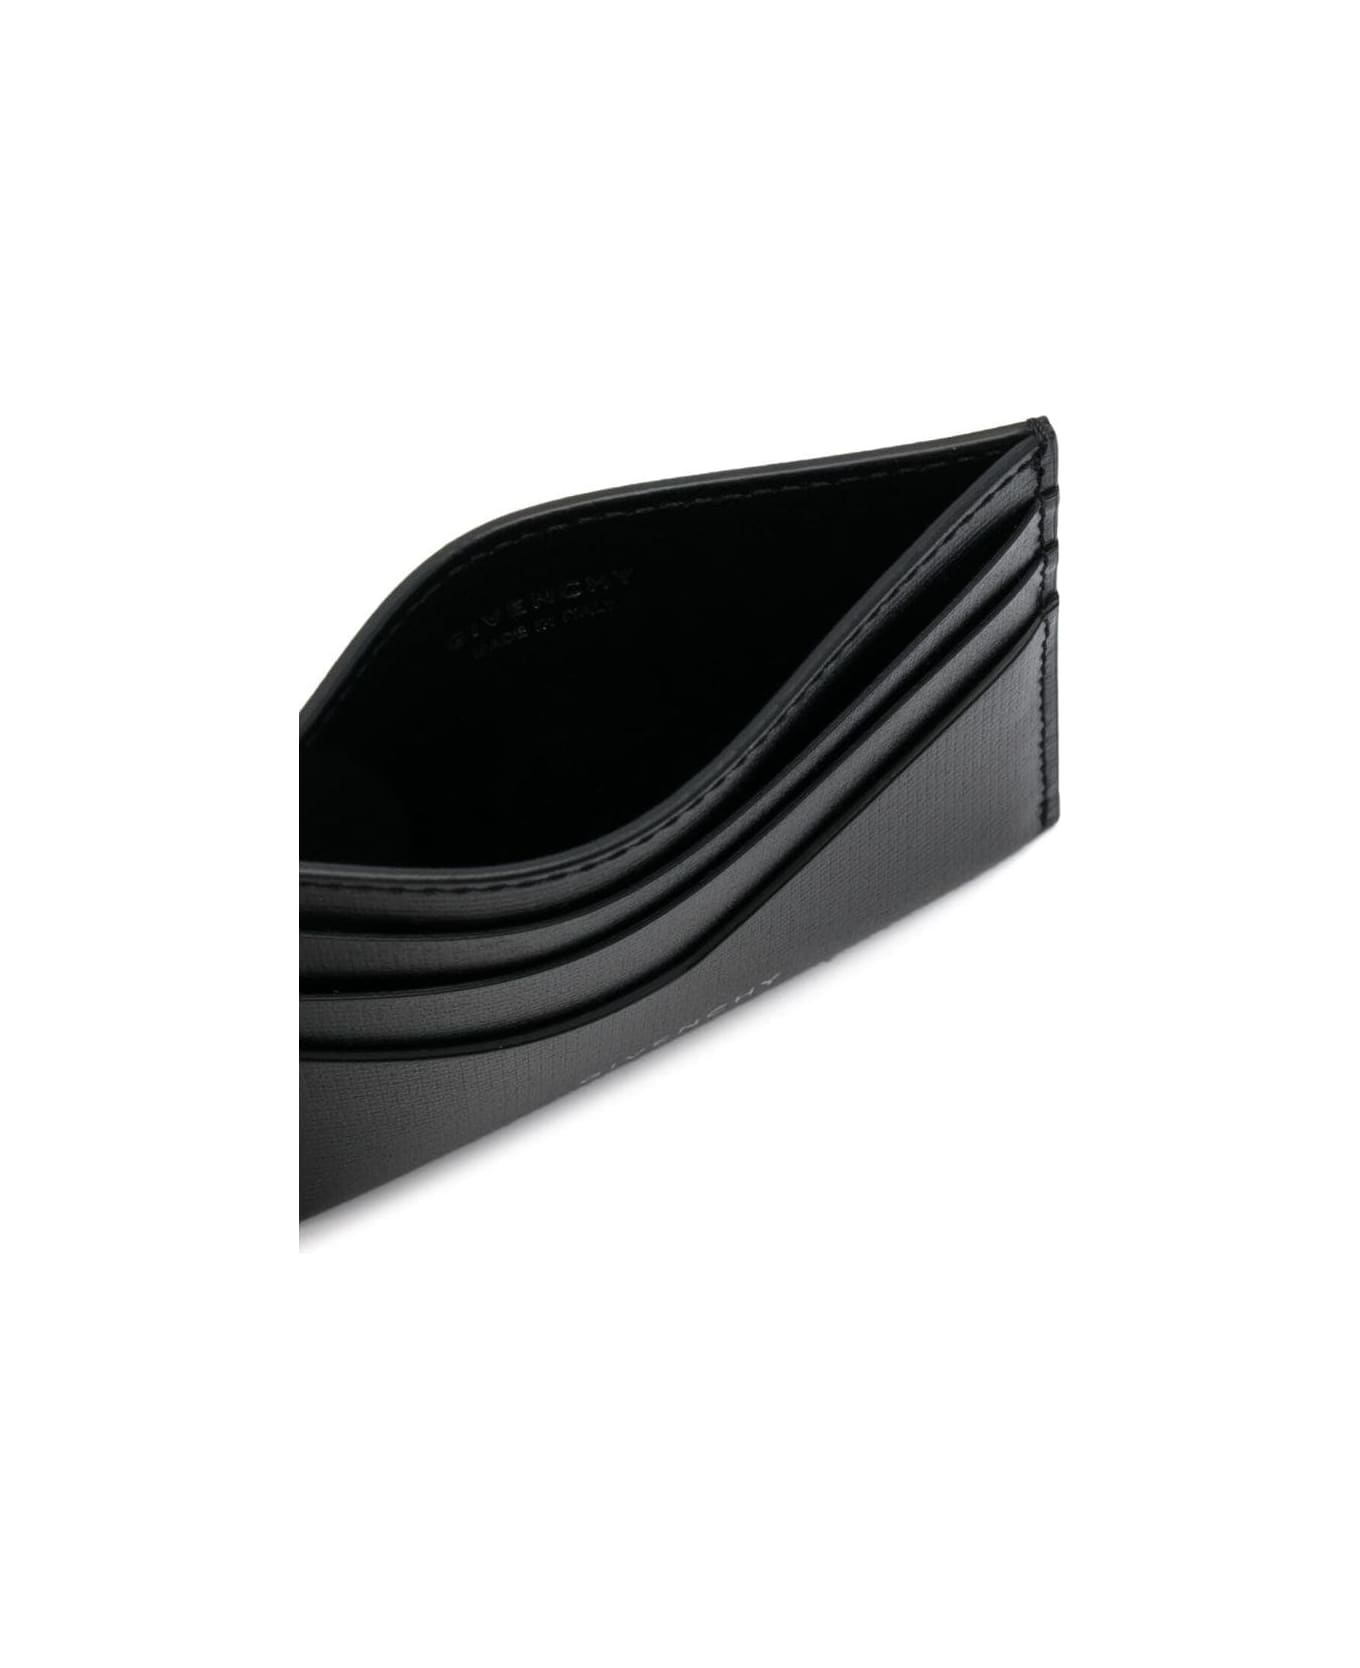 Givenchy Card Holder In Black Classique 4g Leather - Black